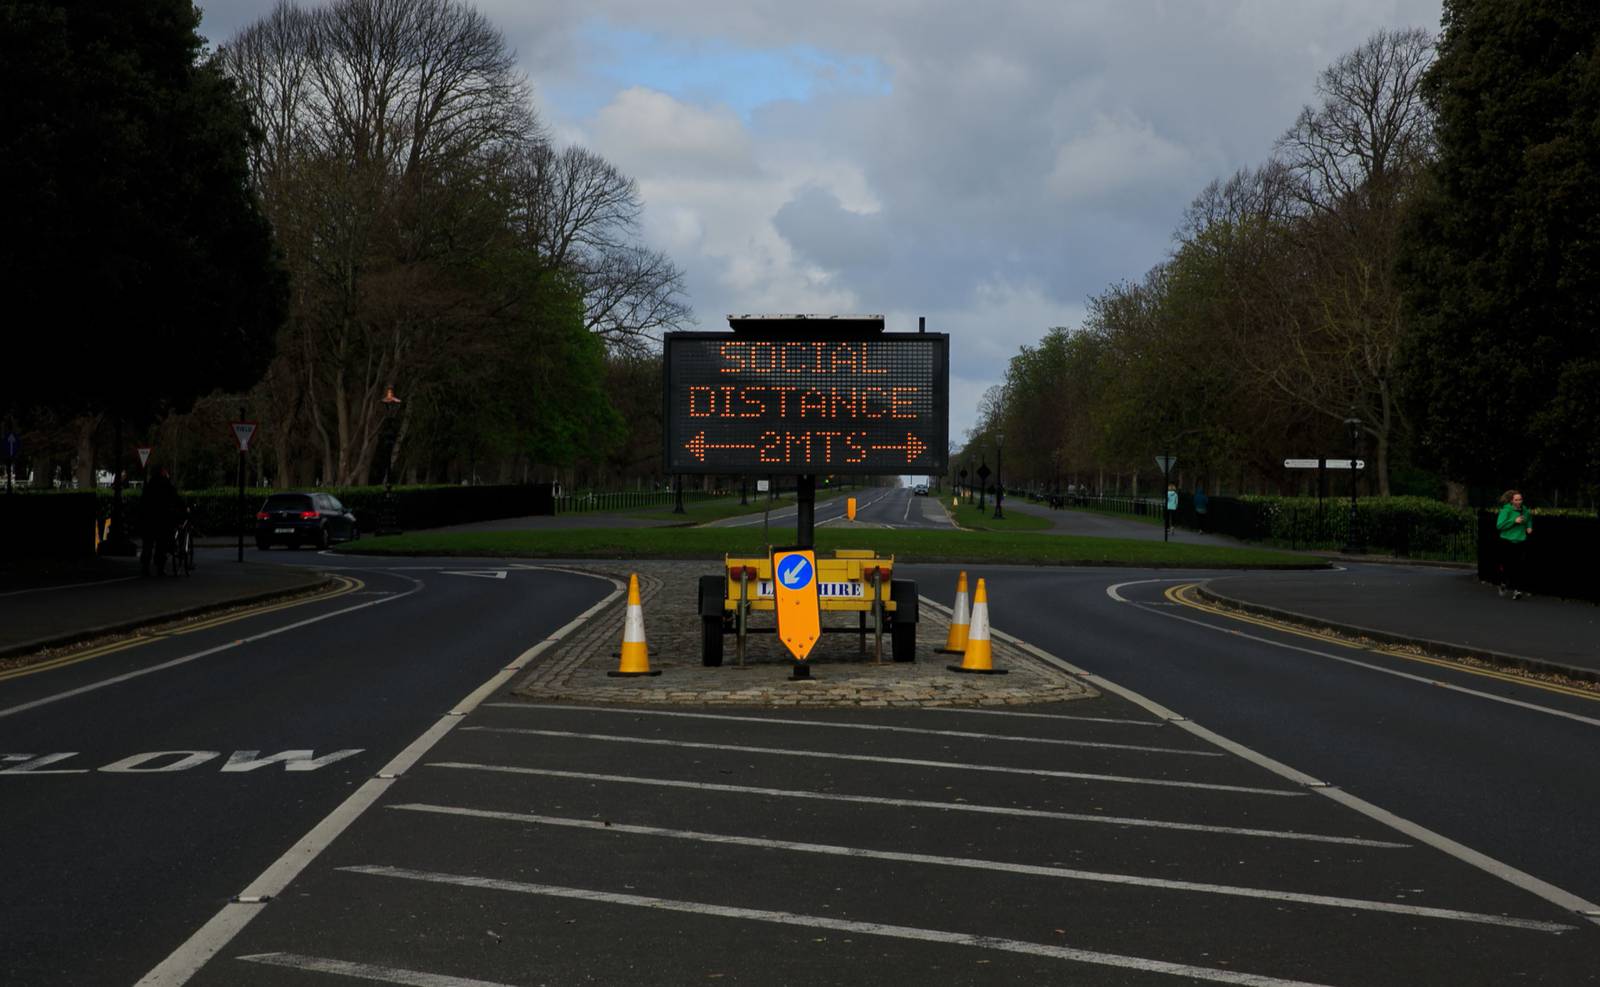 31/03/2020
A 2 metre social distancing sign due to  Covid-19 (Coronavirus) in Ireland at the Phoenix Park, Dublin
Photo:Gareth Chaney/Collins